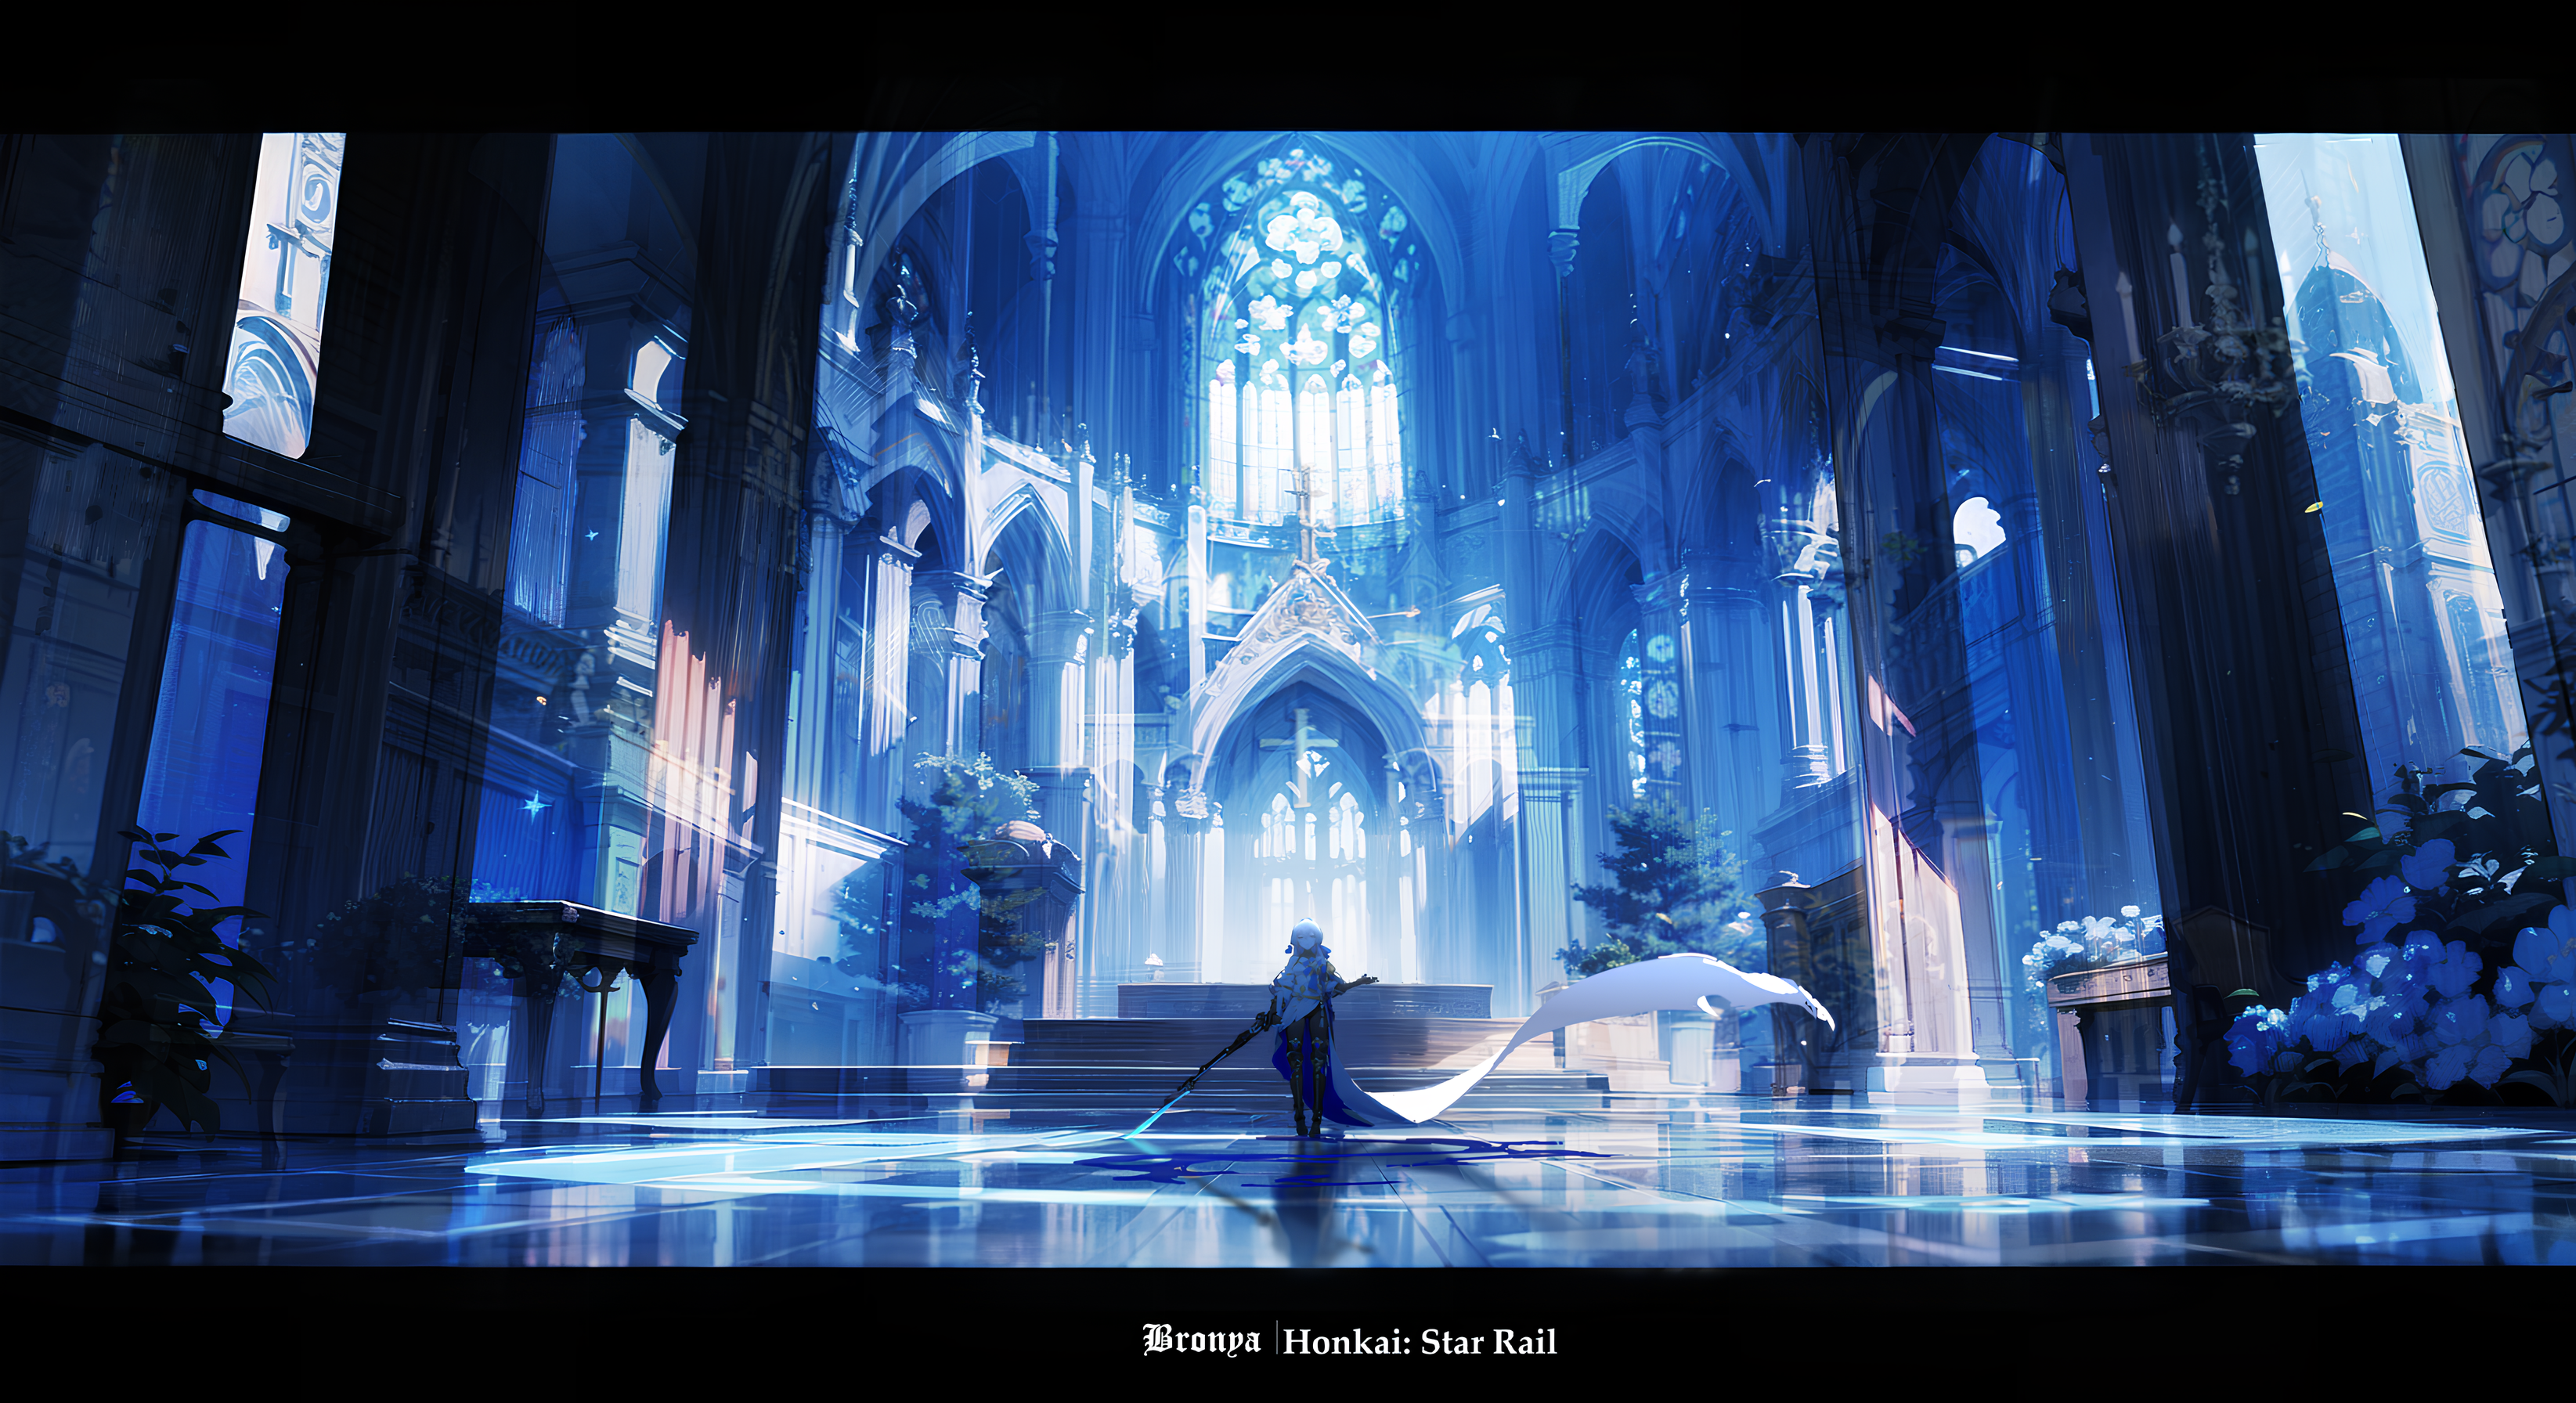 Anime 3290x1792 Honkai: Star Rail artwork Bronya Rand anime girls rifles castle Nid417 reflection cathedral interior looking at viewer standing